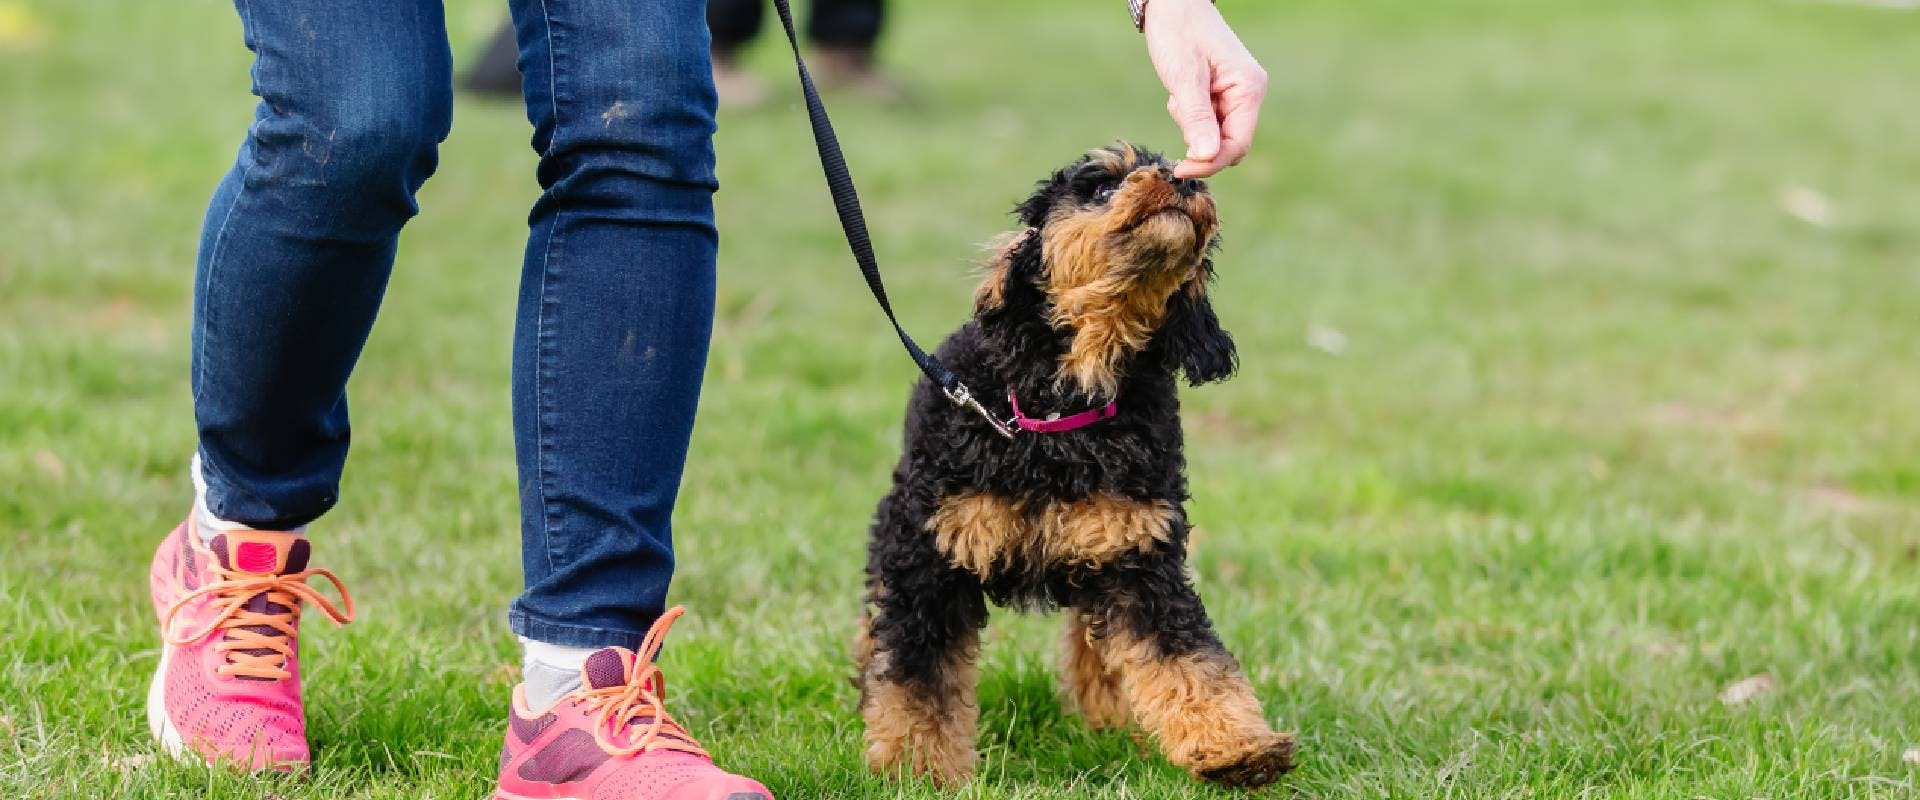 Poodle experiencing leash training